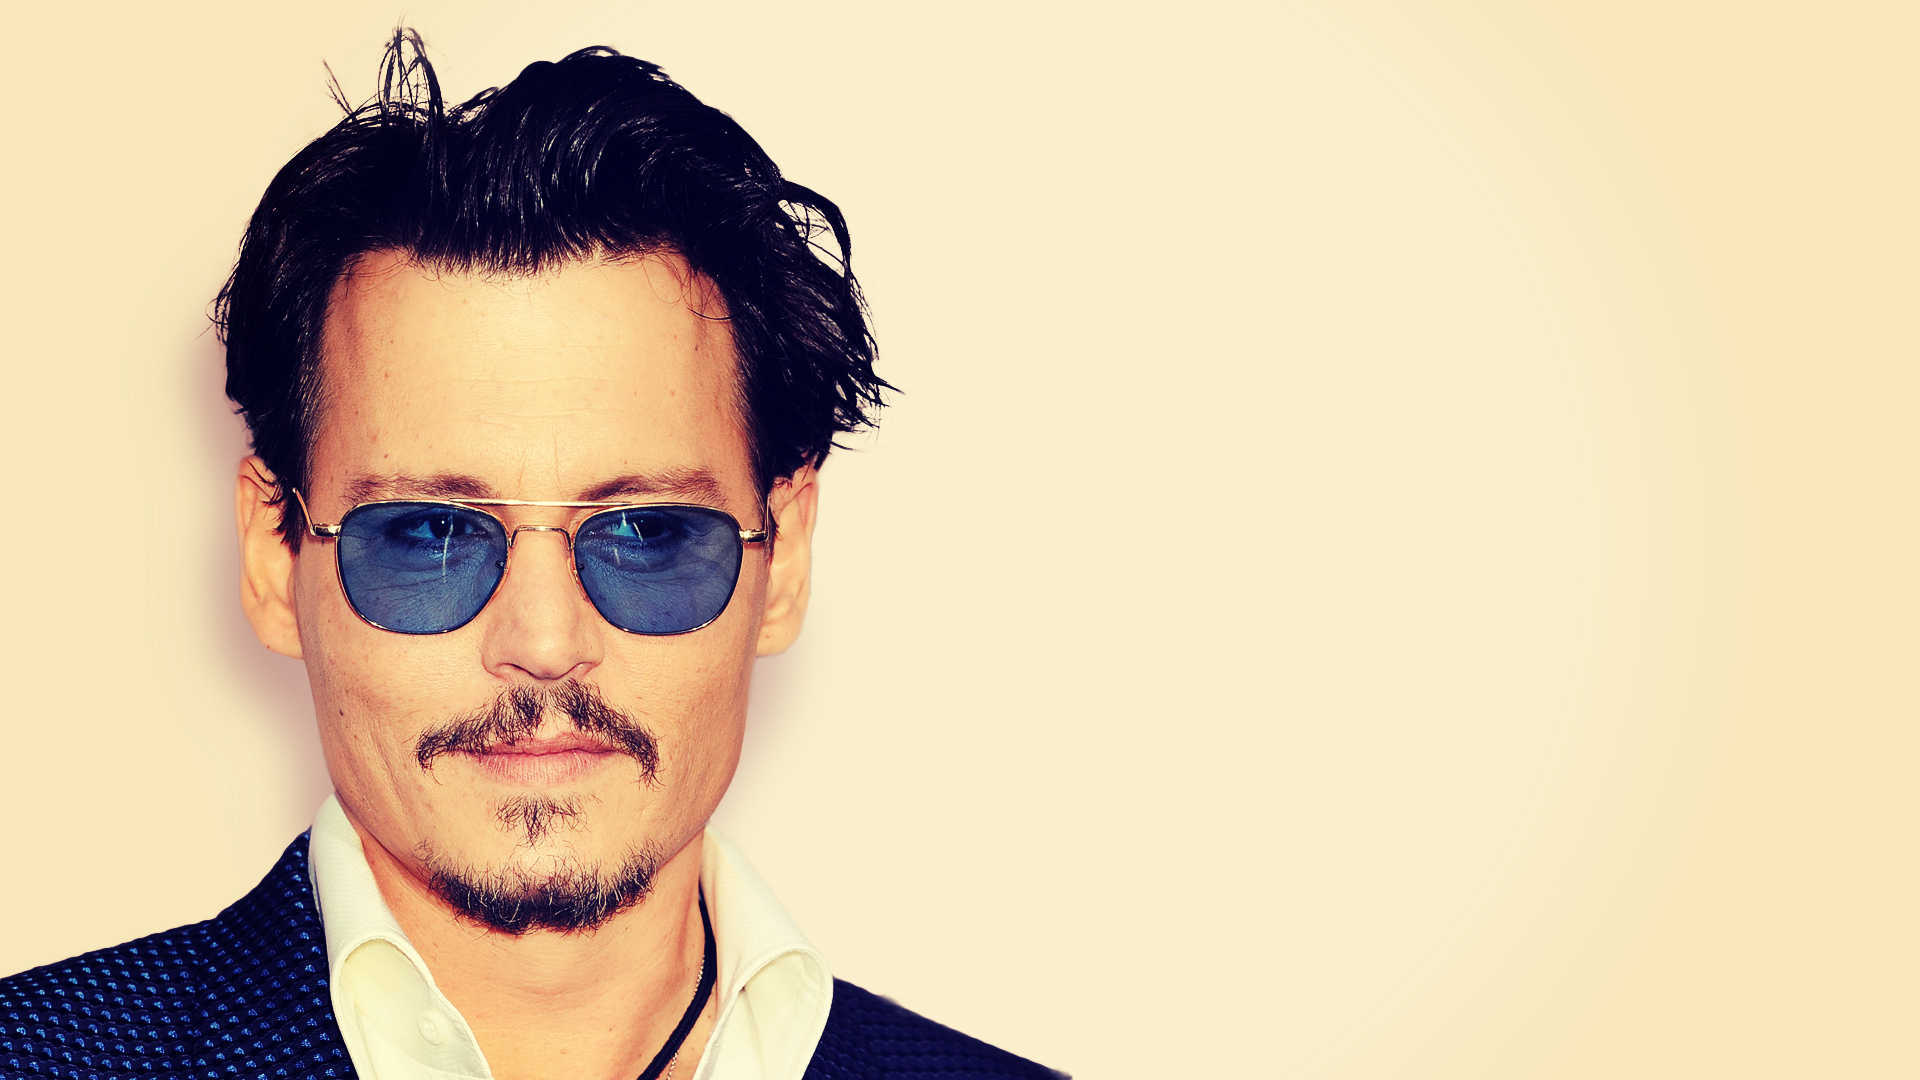 Latest Collection of Johnny Depp Wallpaper in HD